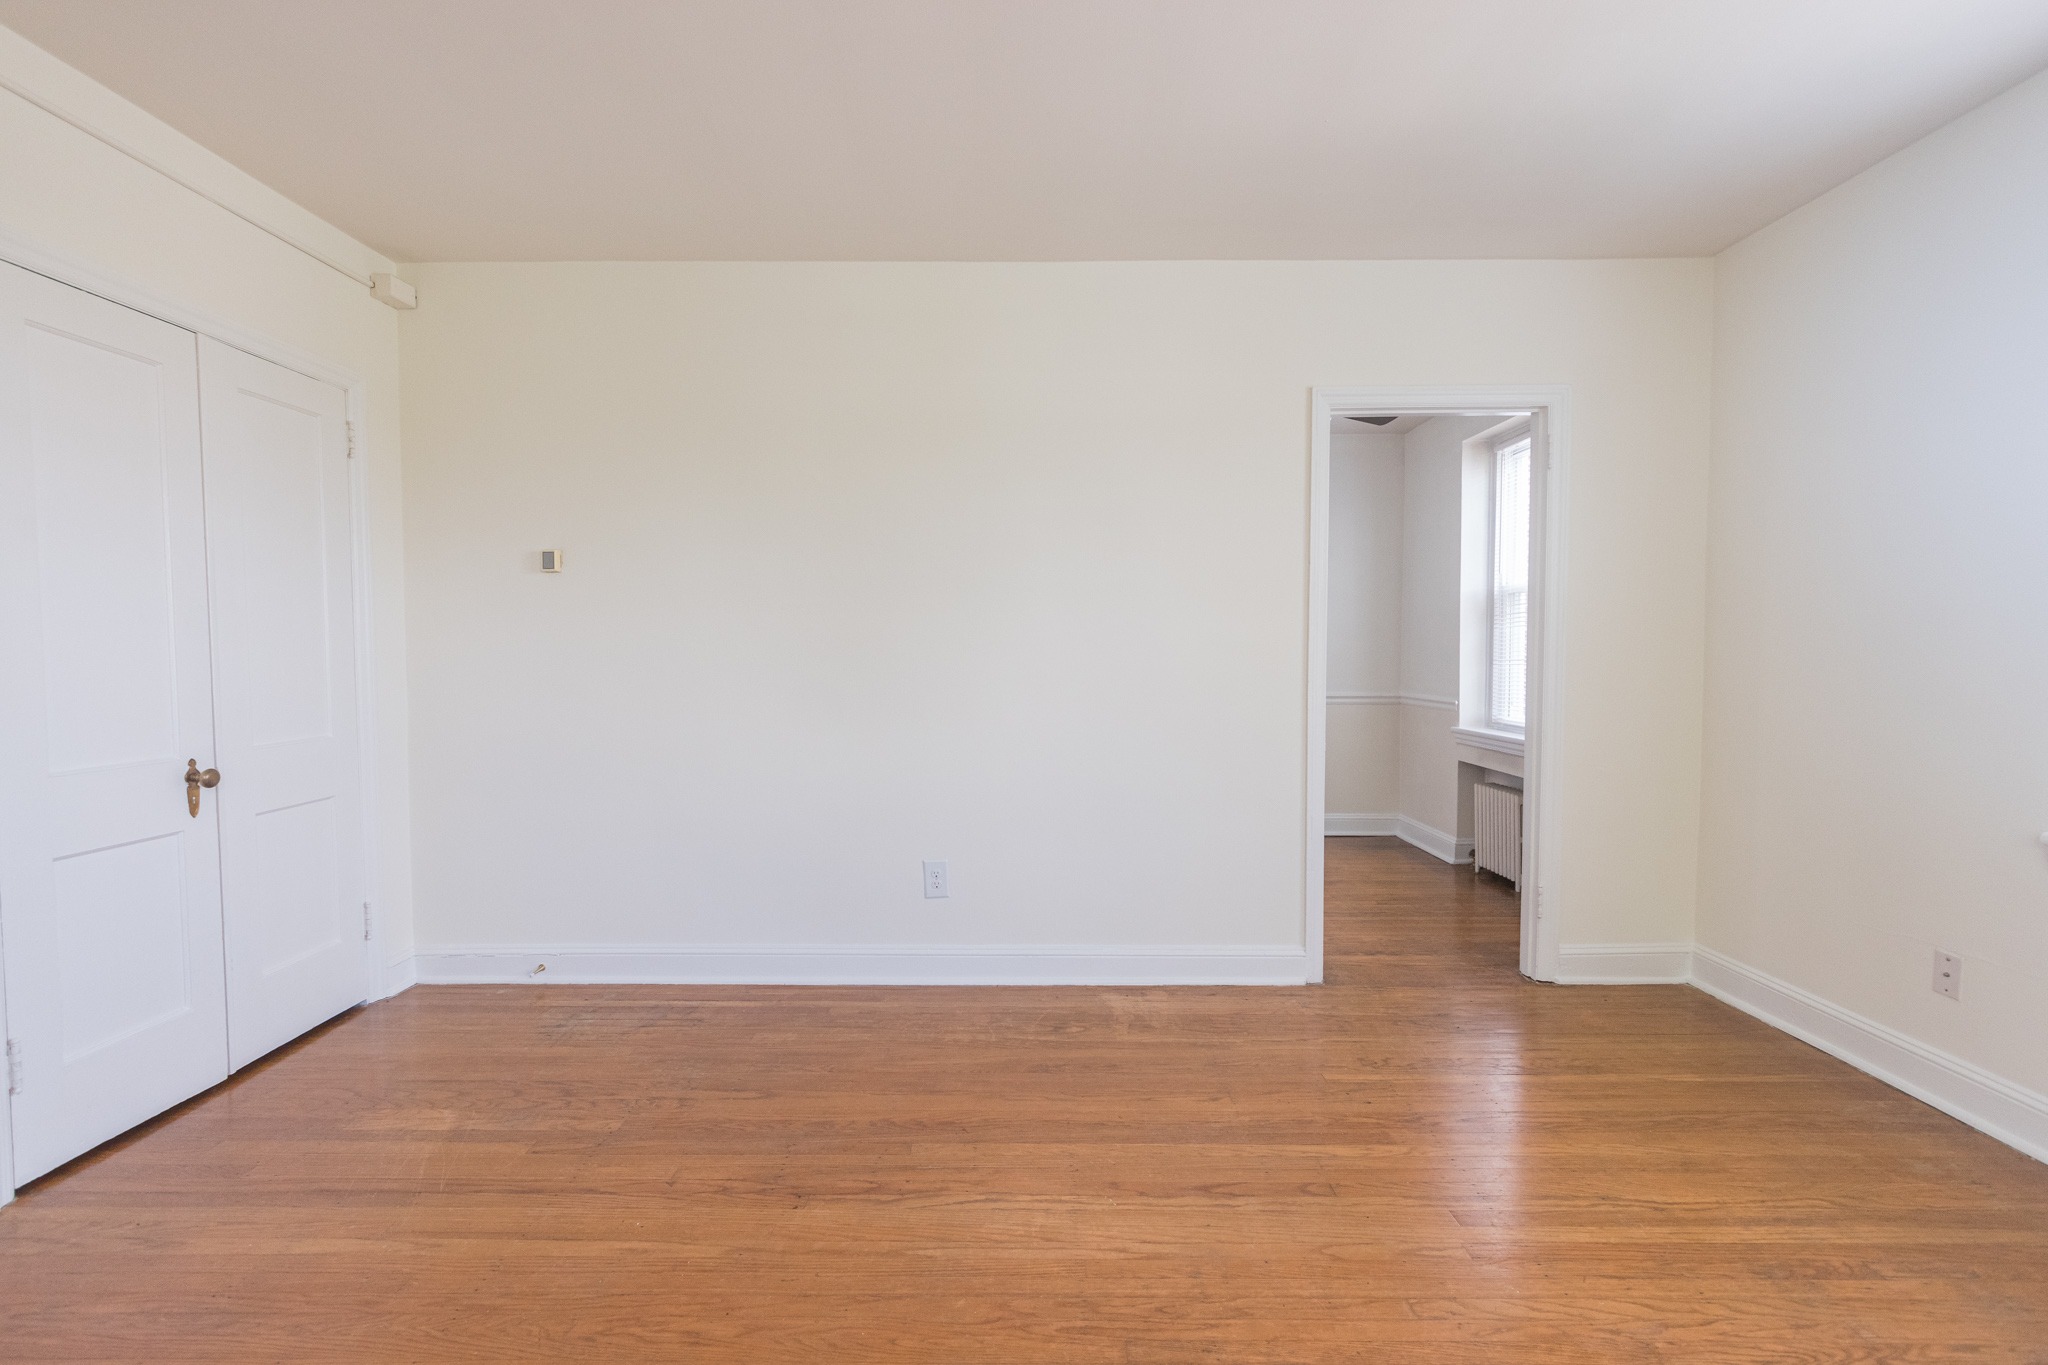 Bedroom area of an apartment unfurnished, fitted with wooden flooring, a closet, and a high ceiling